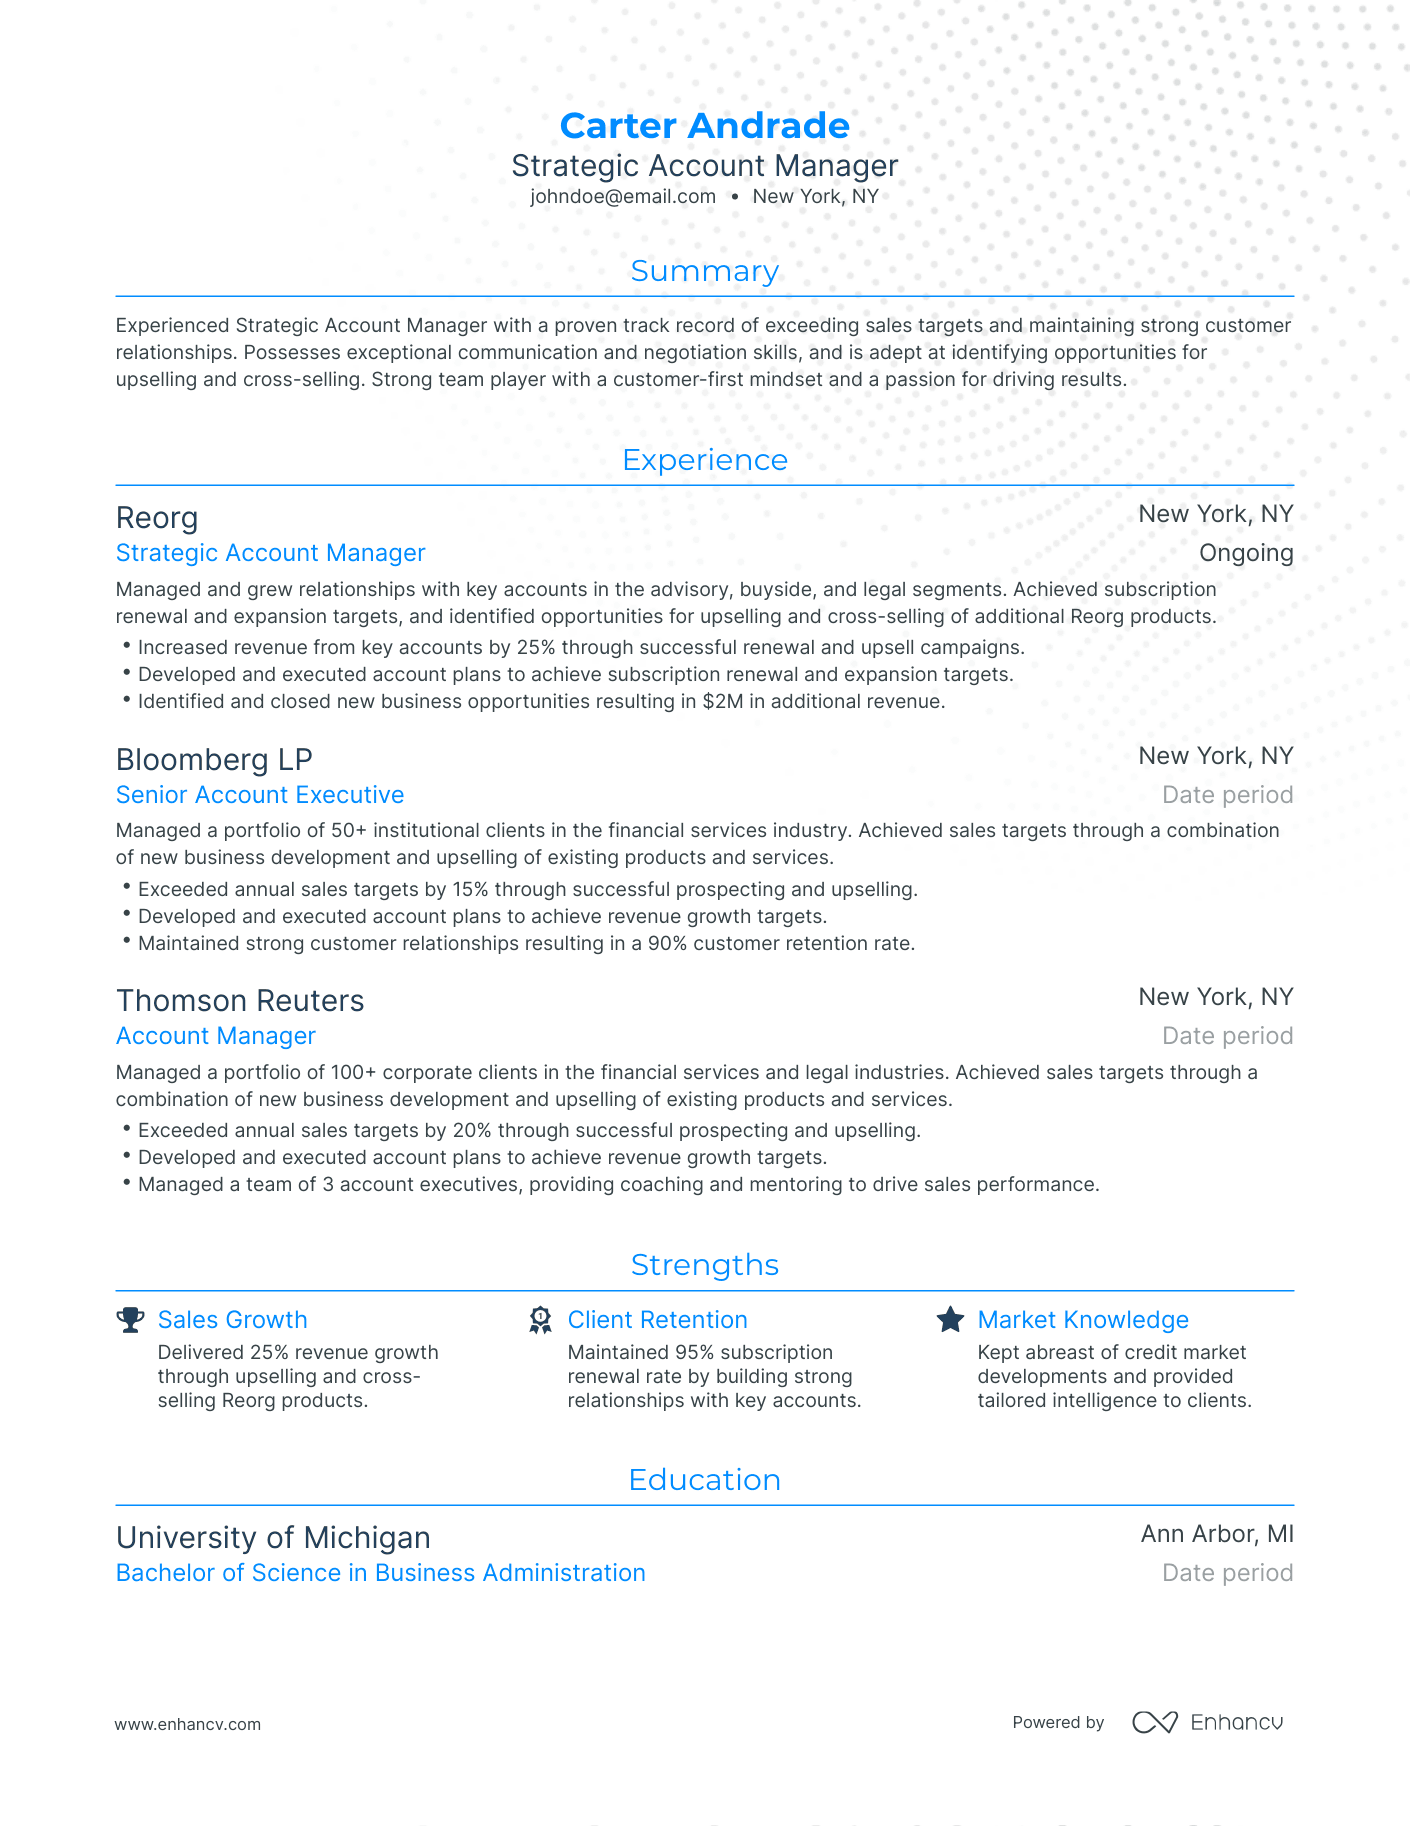 Traditional Strategic Account Manager Resume Template